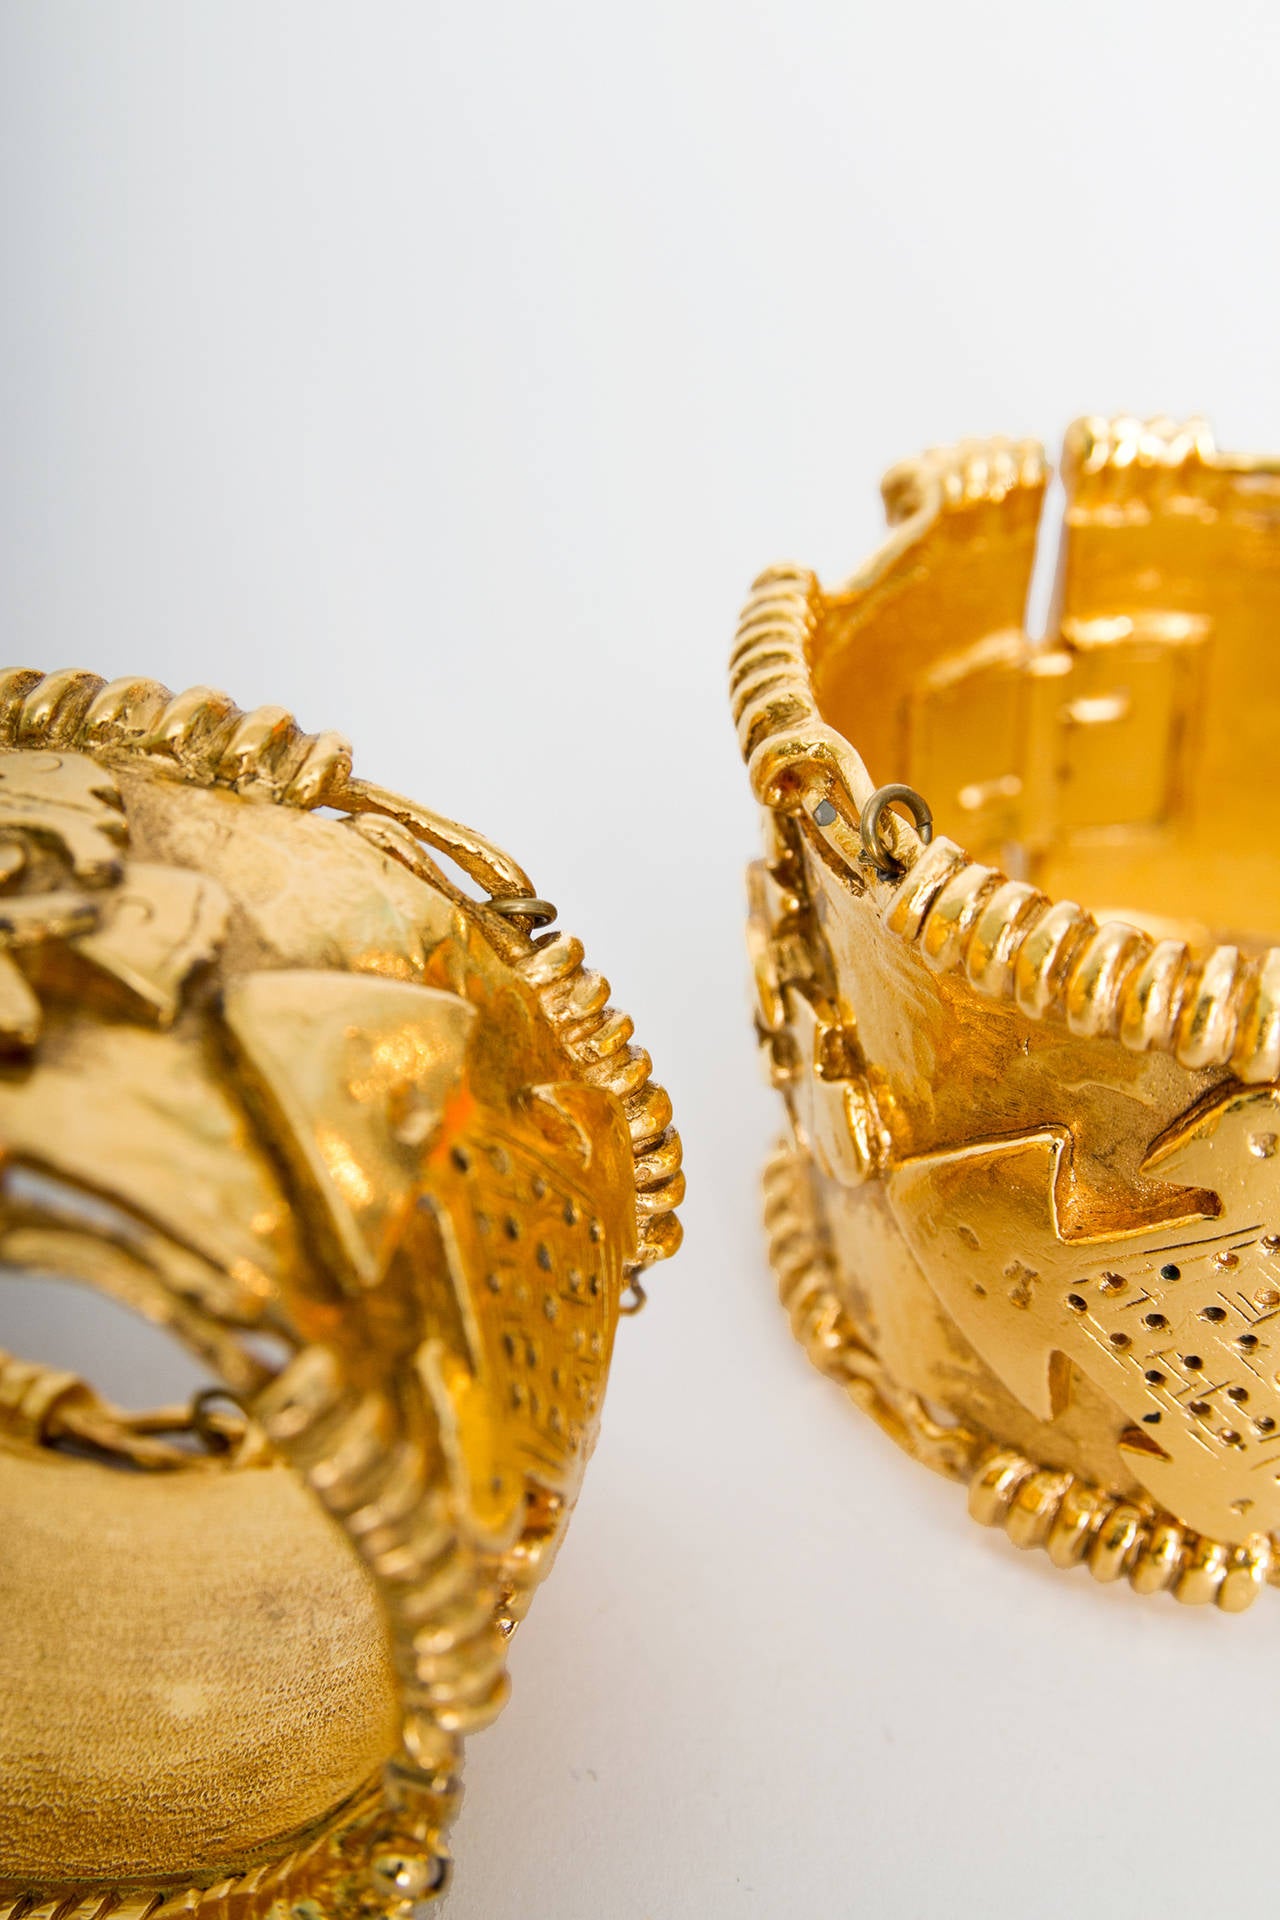 A rare pair of Chanel cuff bracelets with Chanel logo - gold plated in 24 carat gold. Stamped Chanel A/W 1994.